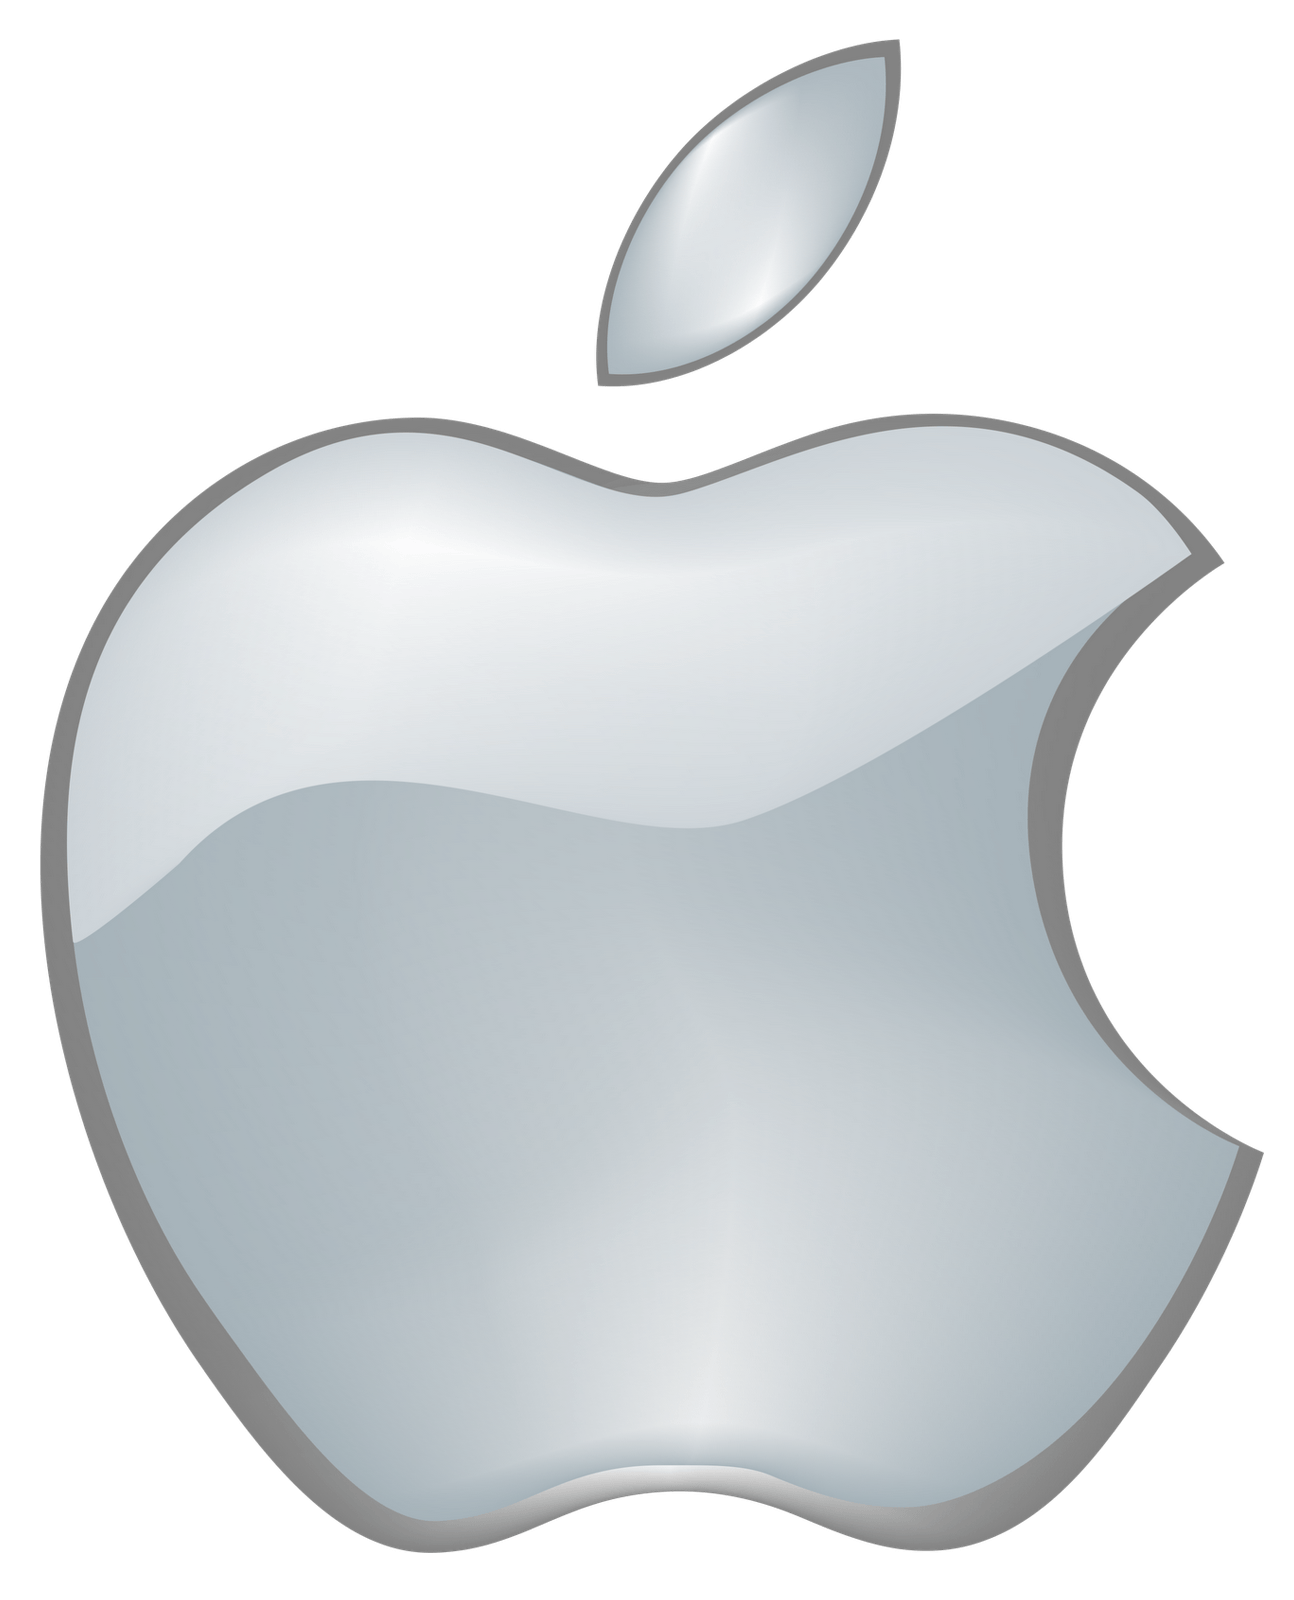 White Apple Computer Logo - Apple logo jpg royalty free download - RR collections